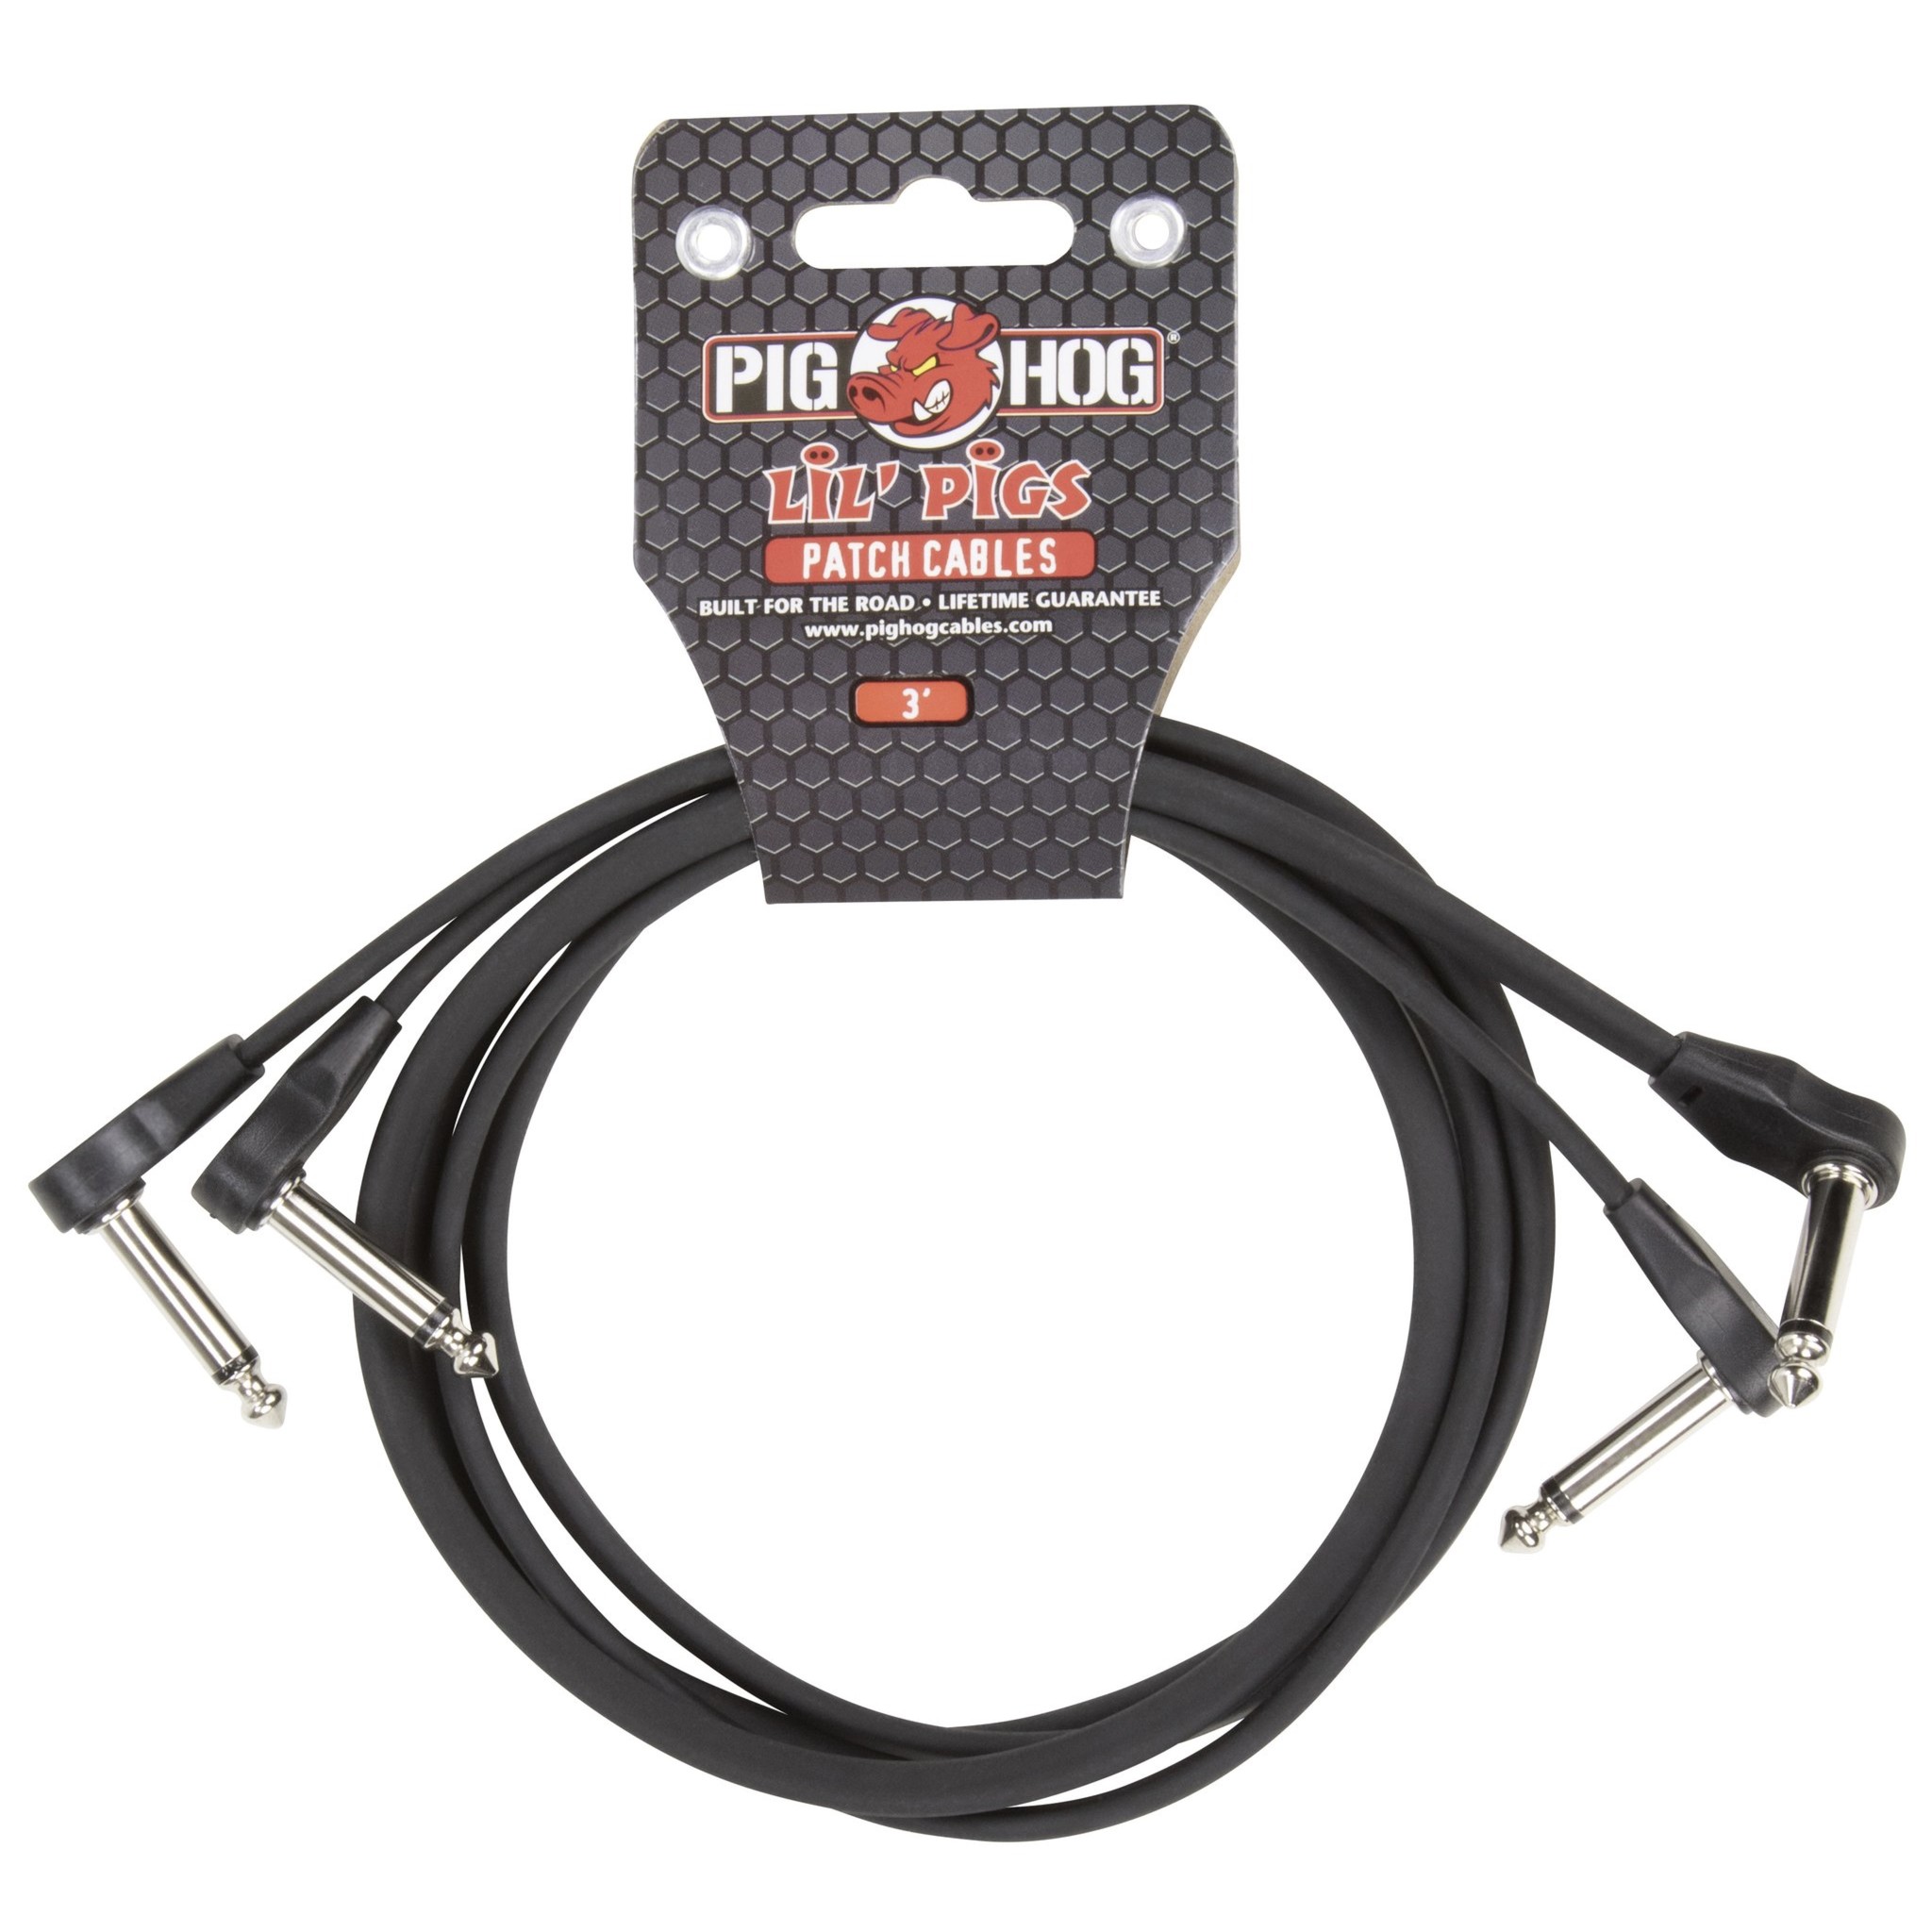 Pig Hog Lil' Pigs 3-Foot Low Profile Flat Patch Cables - 2 Pack